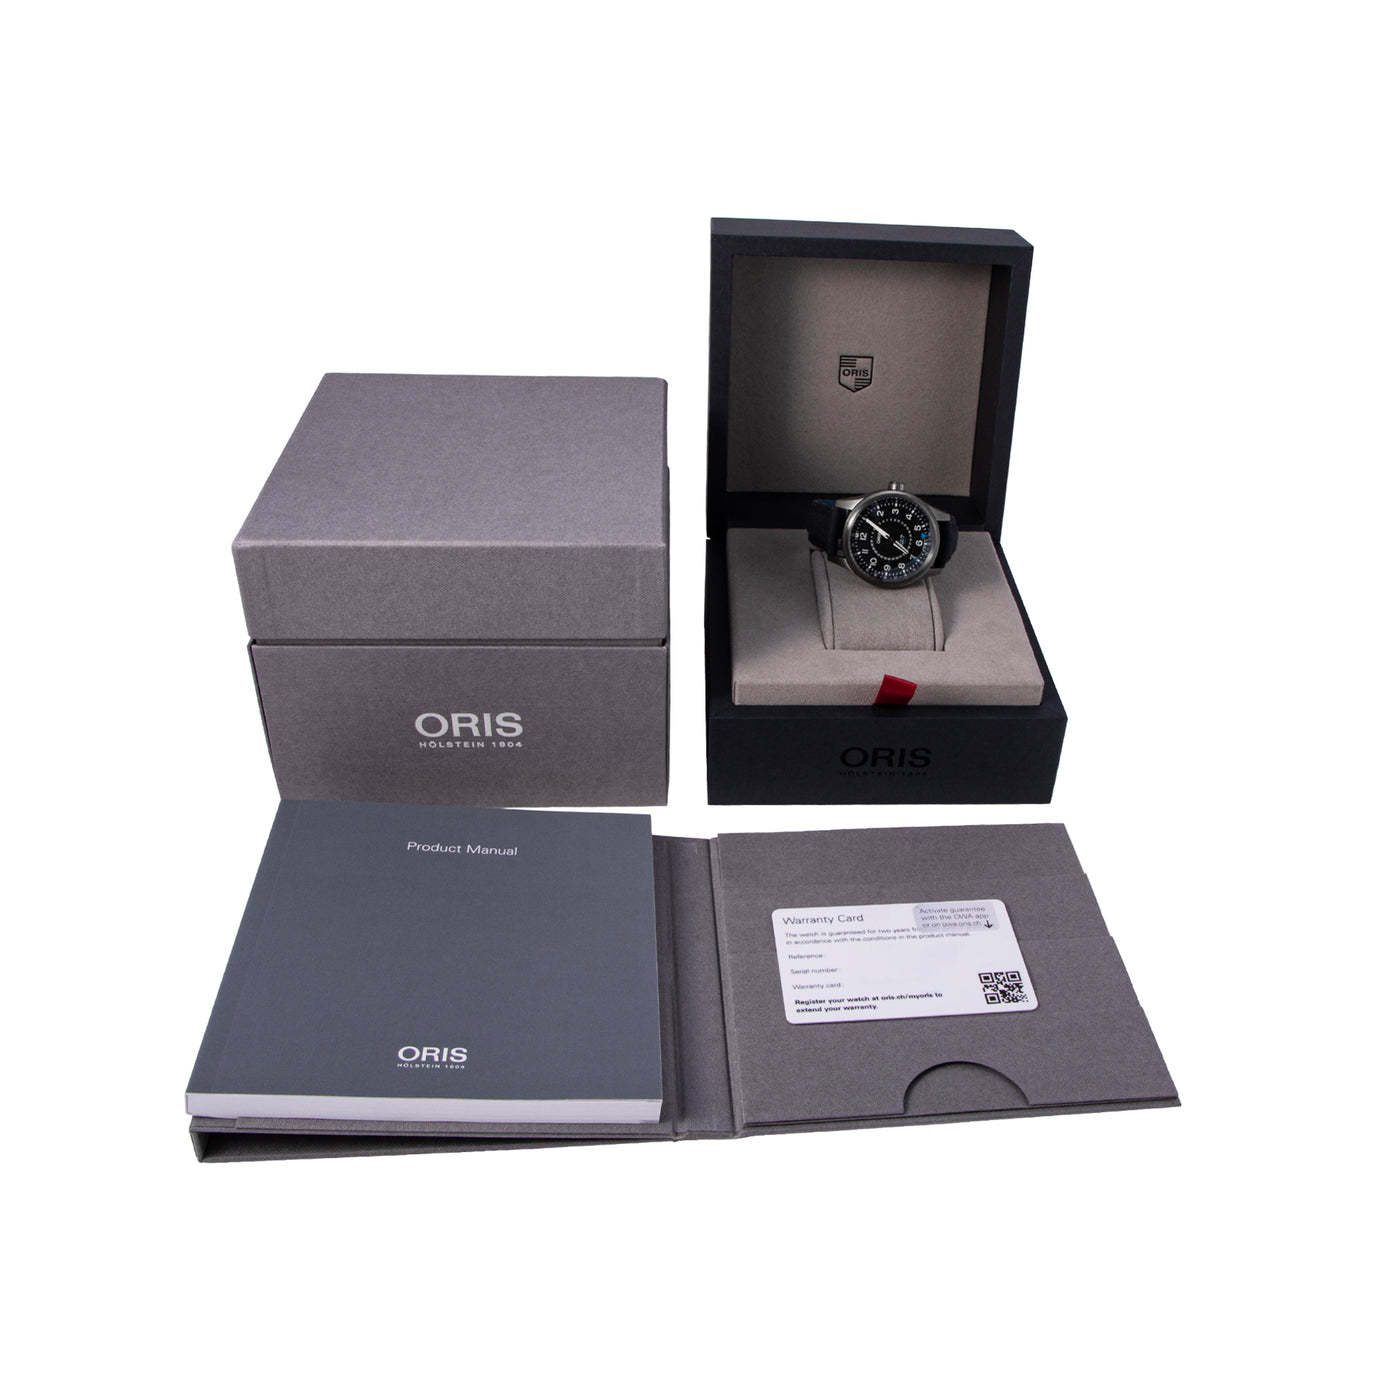 Oris 57Th Reno Air Race Limited Edition full set | Timepiece360